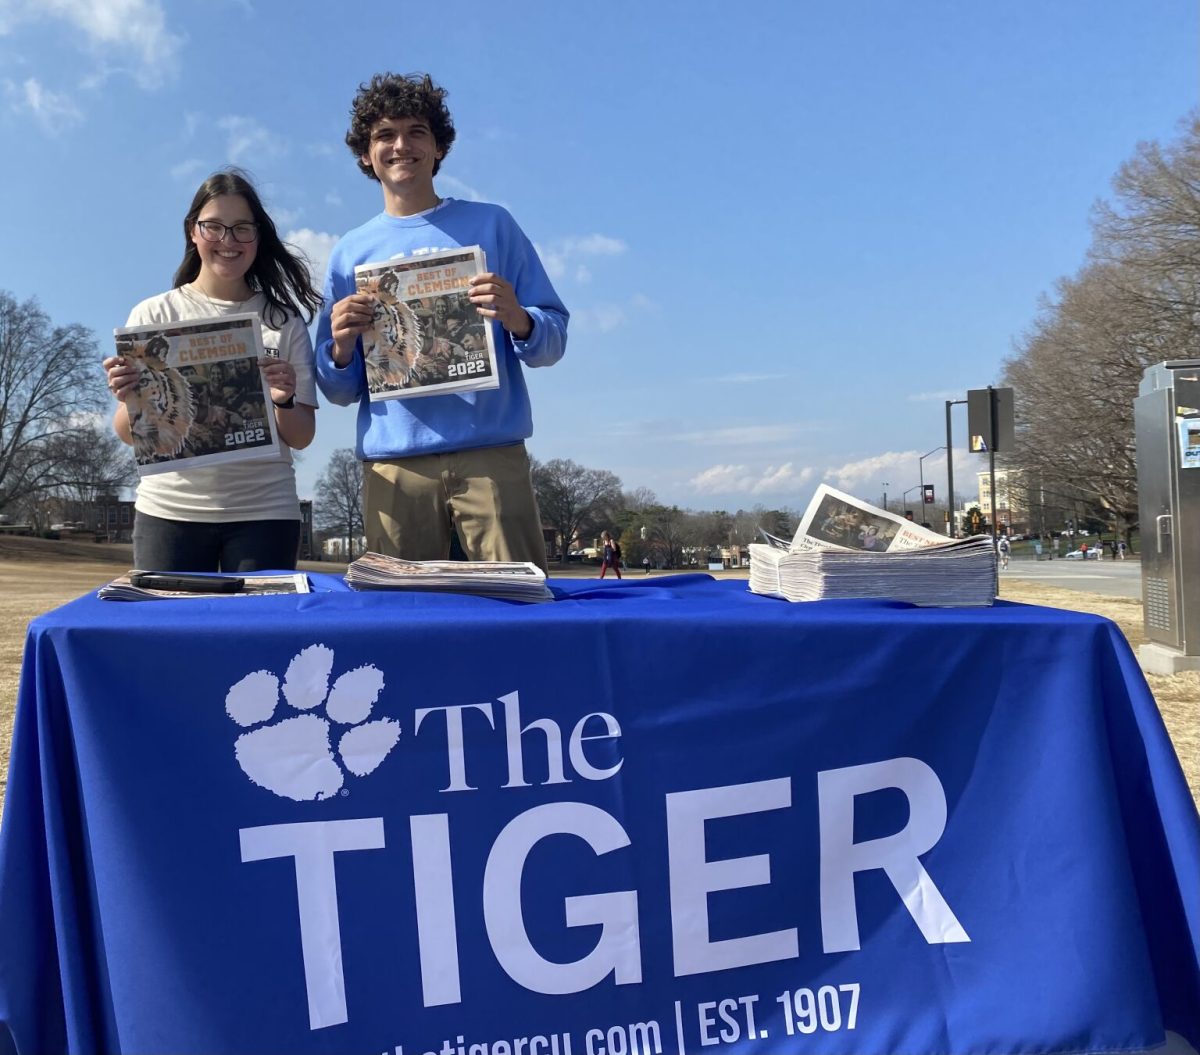 The best part of putting together a print edition is getting it in the hands of the Clemson community! Here, Sydney Ford and Dylan White are distributing copies of The Tigers annual Best of Clemson issue out on Bowman Field.